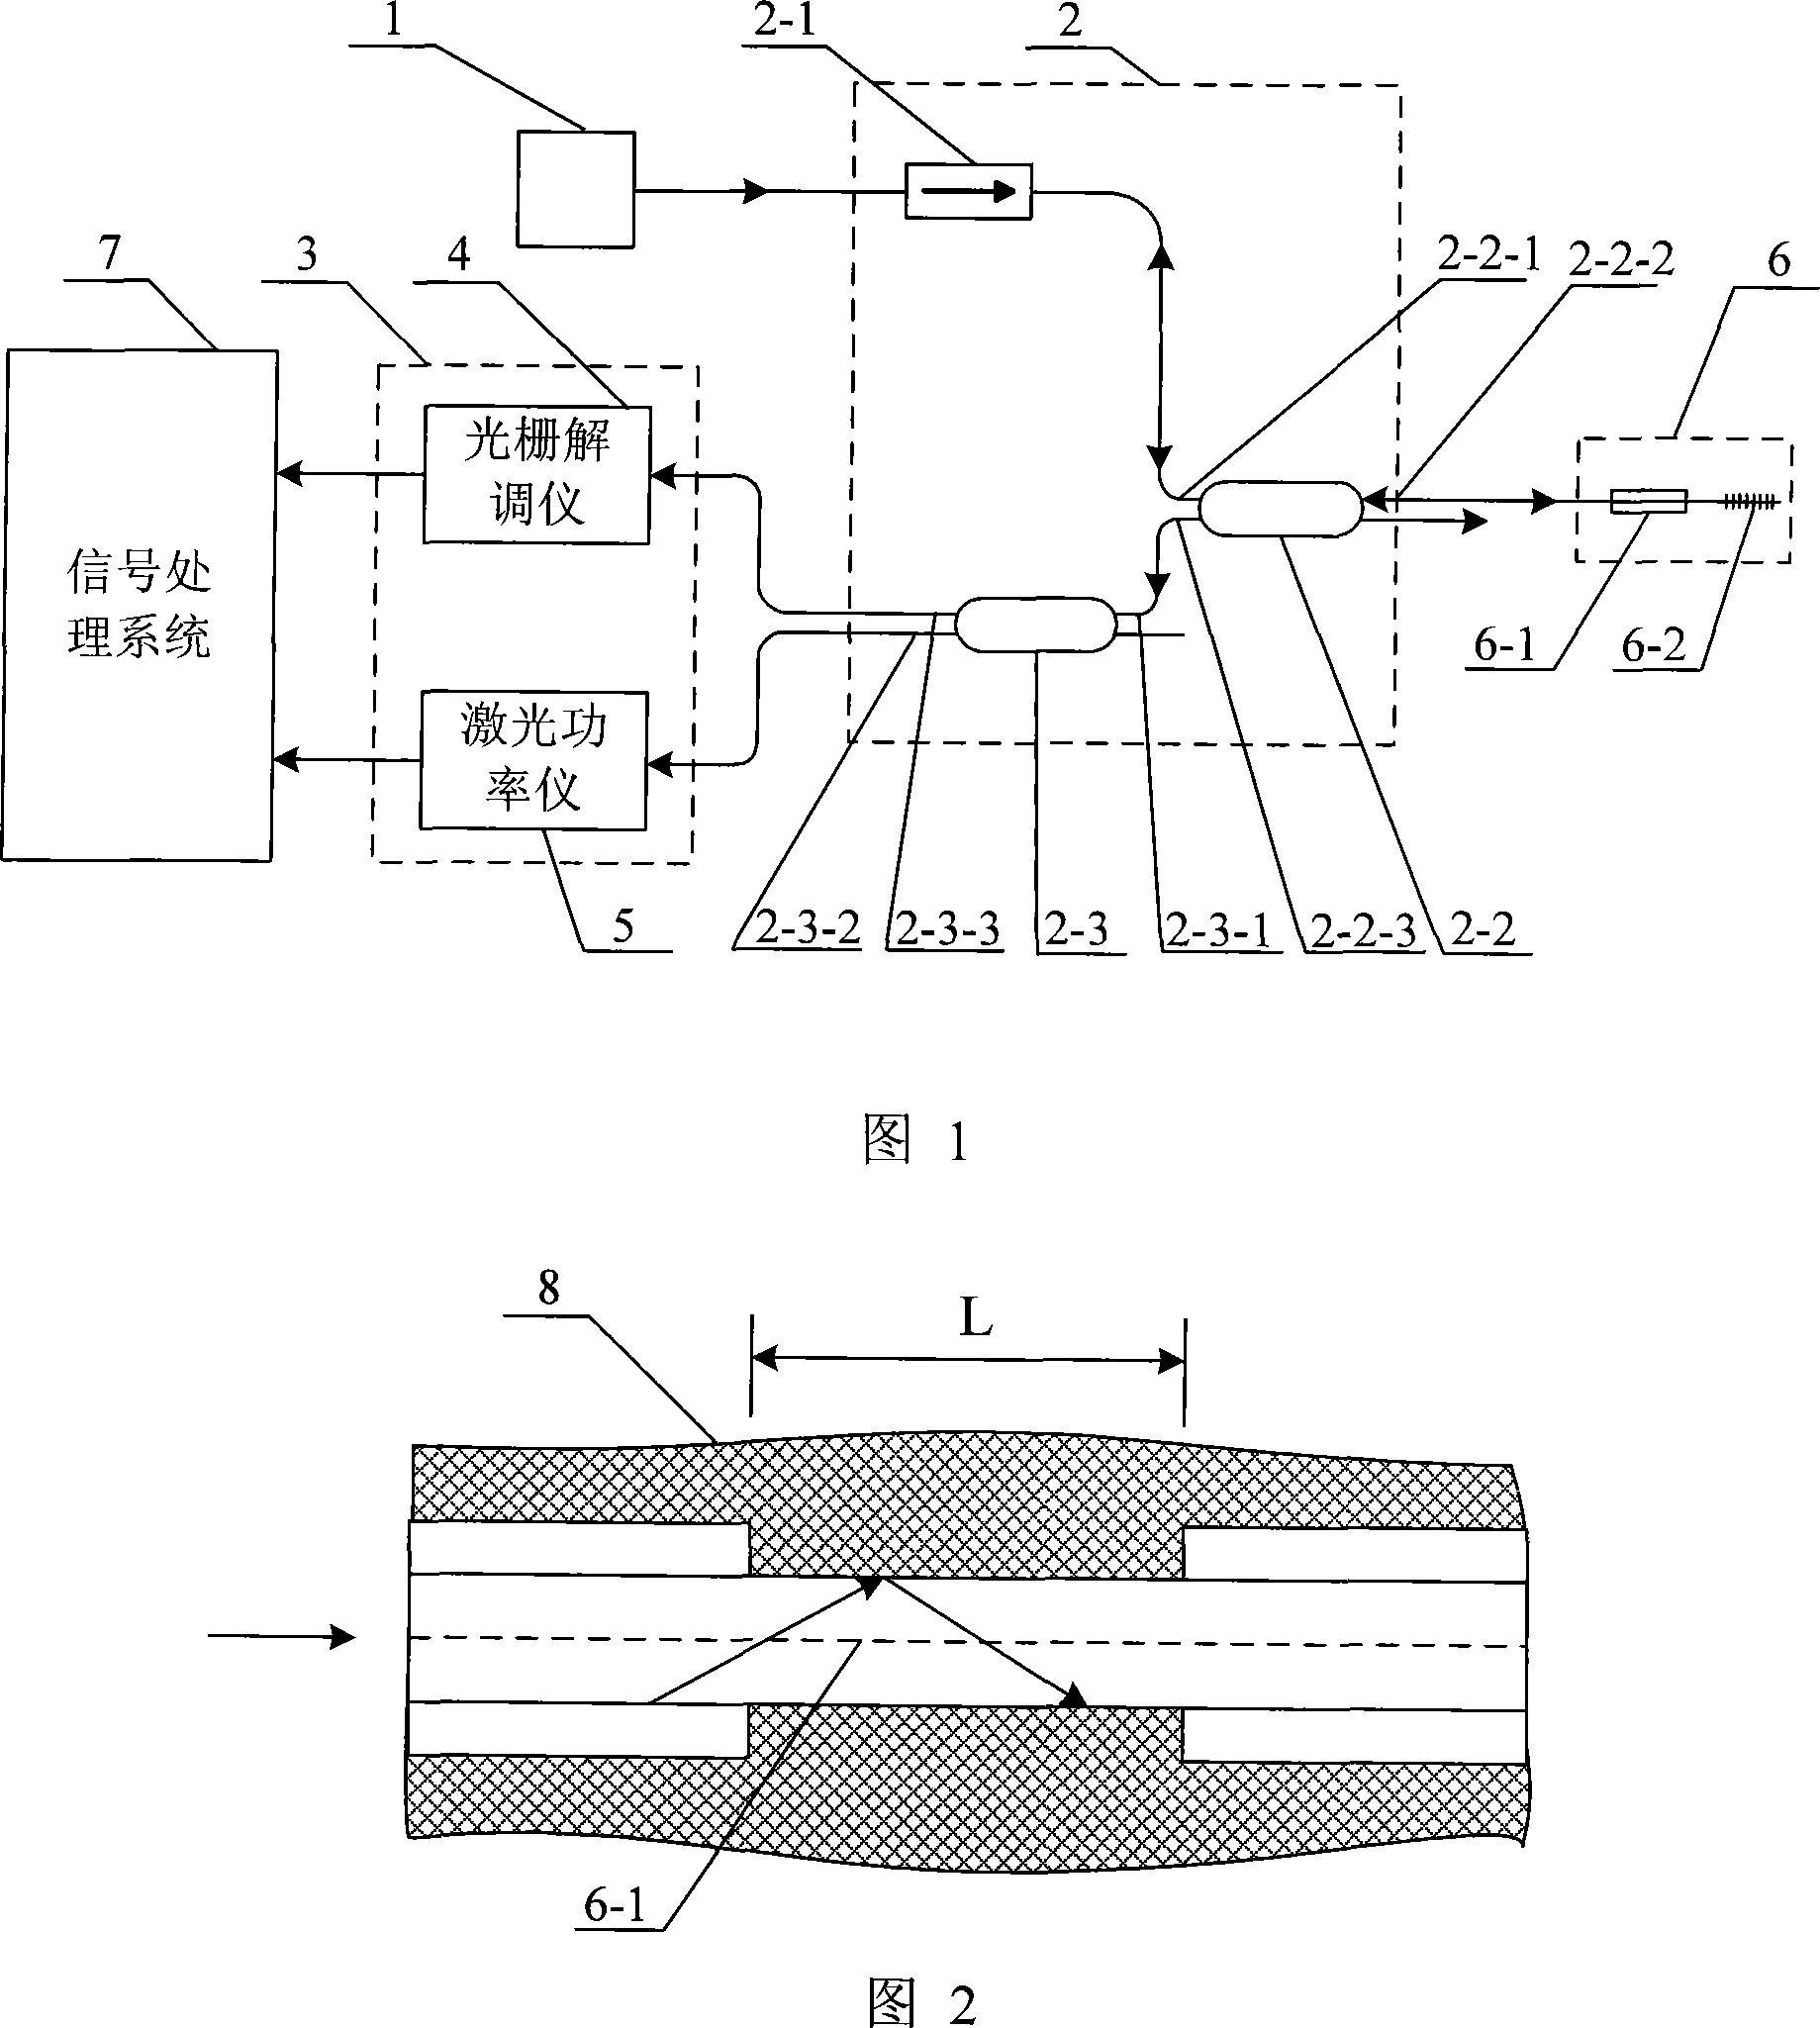 Temperature and solidification rate real-time monitoring device for polymer based composite material forming process